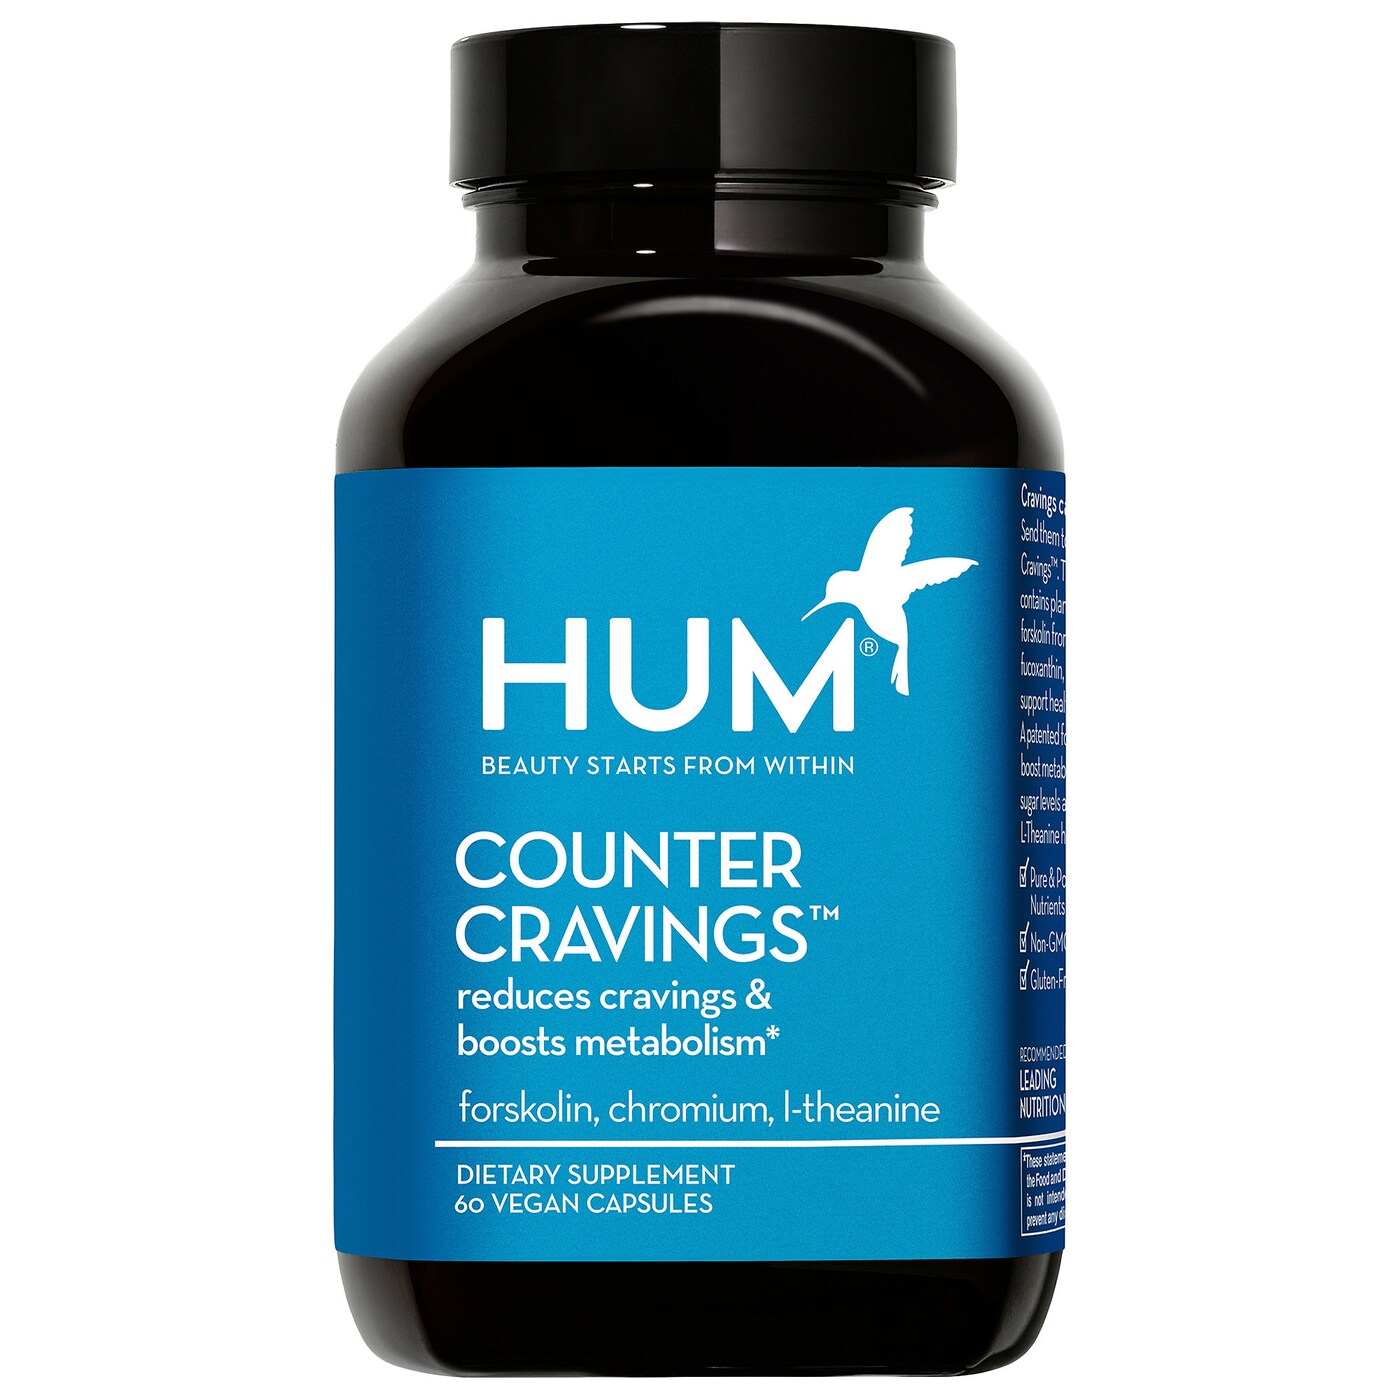 HUM Nutrition - COUNTER CRAVINGS™ | Helps Reduce Cravings and Boosts Metabolism | 60 capsules